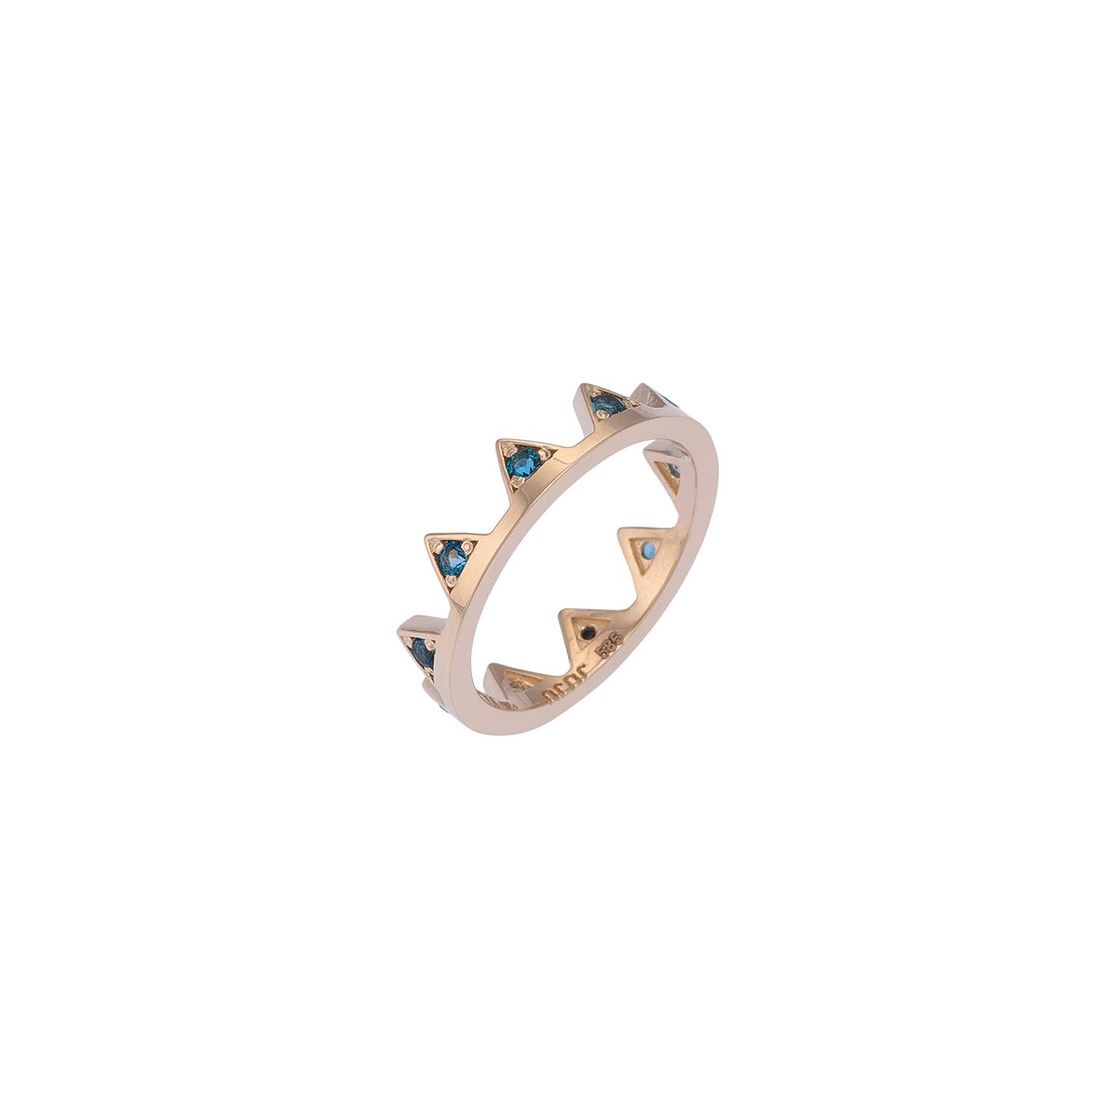 Wild Gold Ring with Sapphire Stones